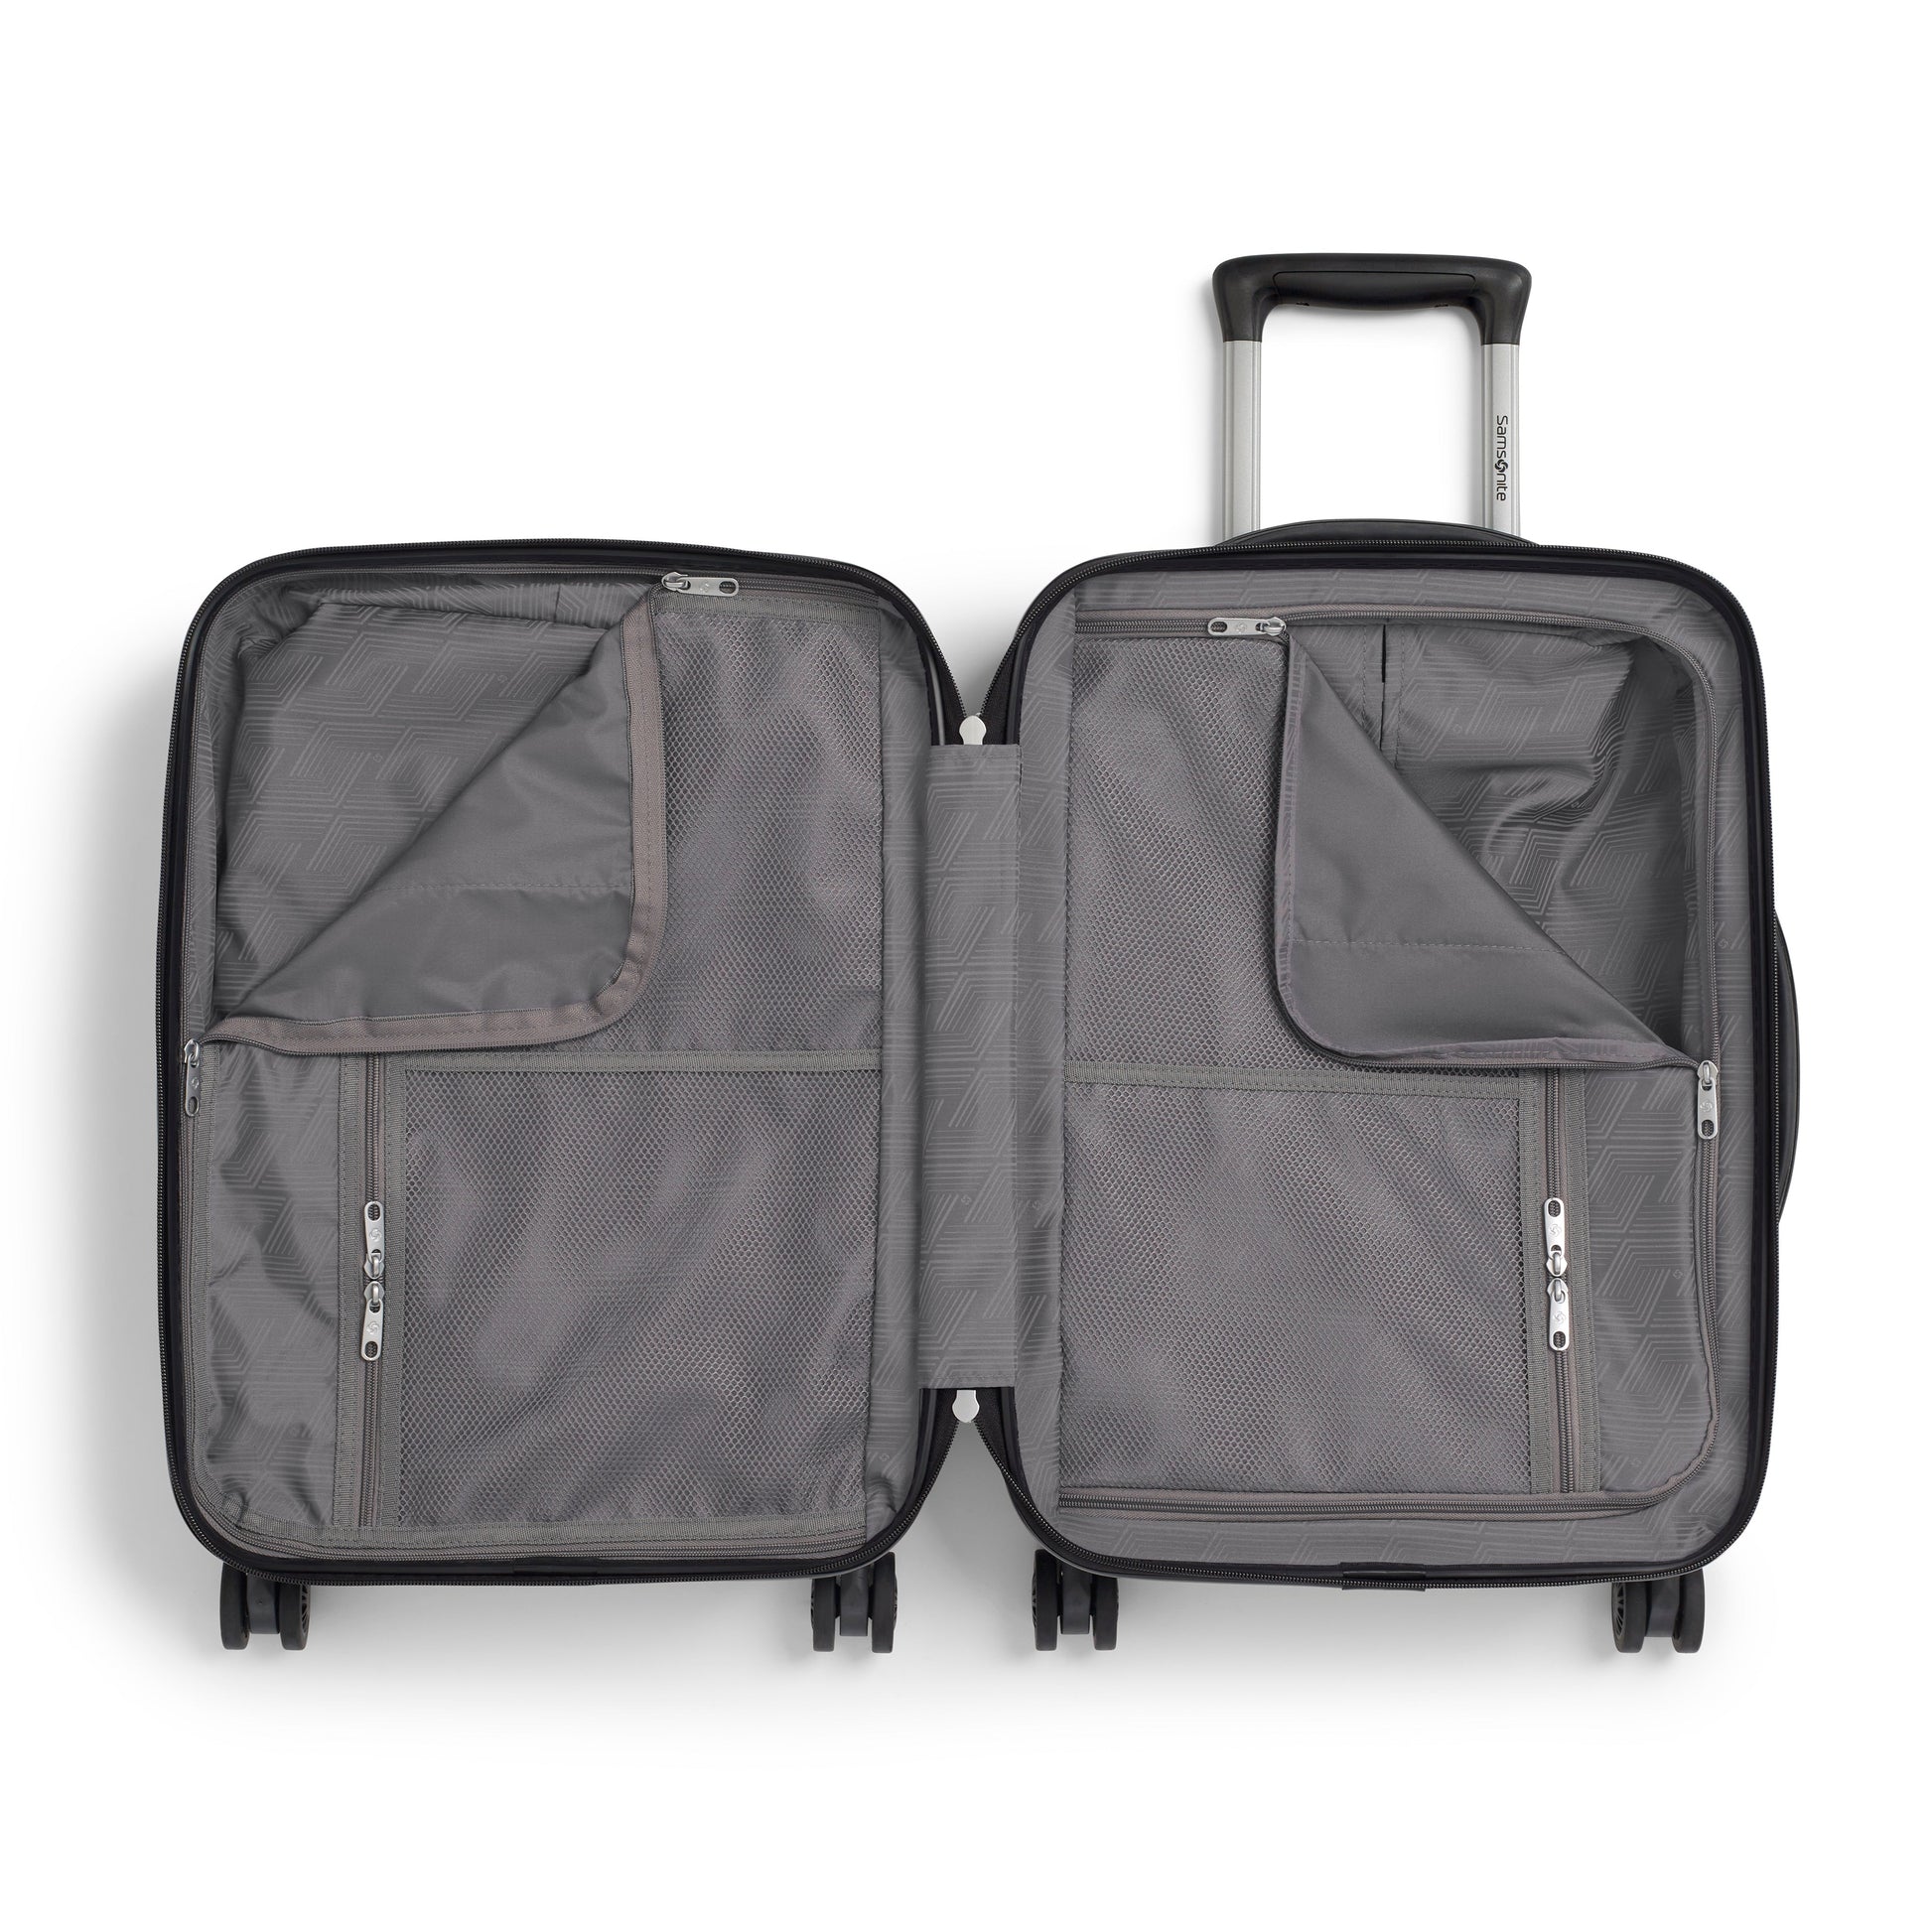 Samsonite Streamlite Pro Spinner Frontload Carry-On Luggage 15.6"